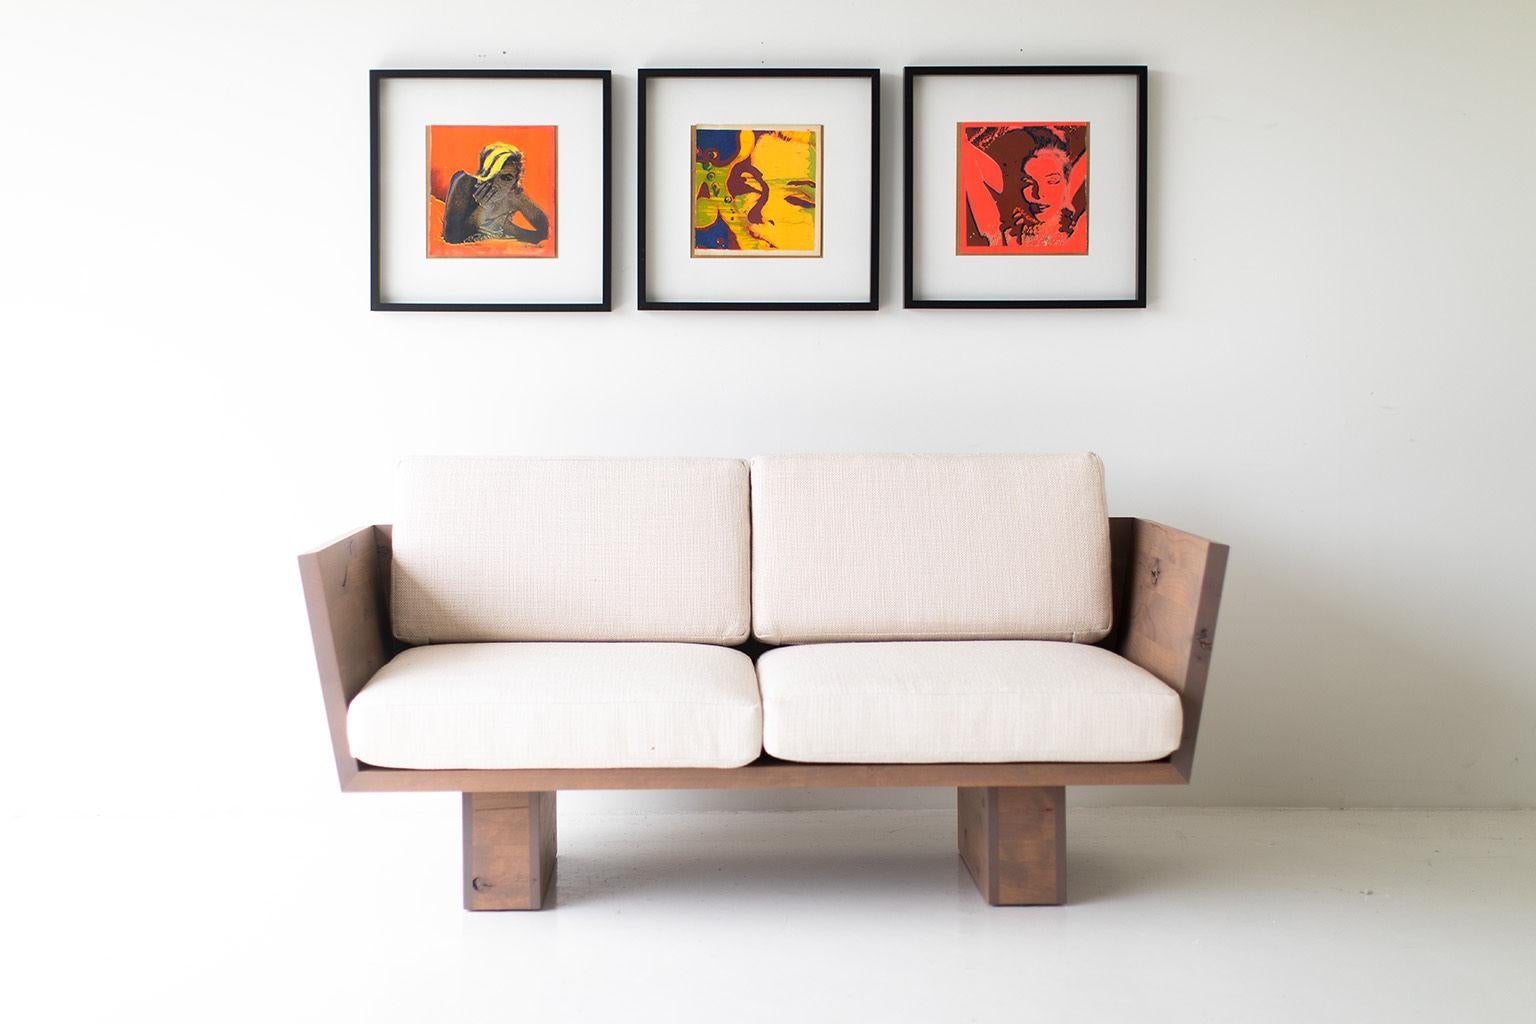 This Suelo Modern Loveseat is beautifully constructed from solid wood in Ohio, USA. The sofa's silhouette is simple, modern, and sleek with comfortable back and seat cushions. This is the perfect loveseat for any space, indoor or outdoor. The Suelo